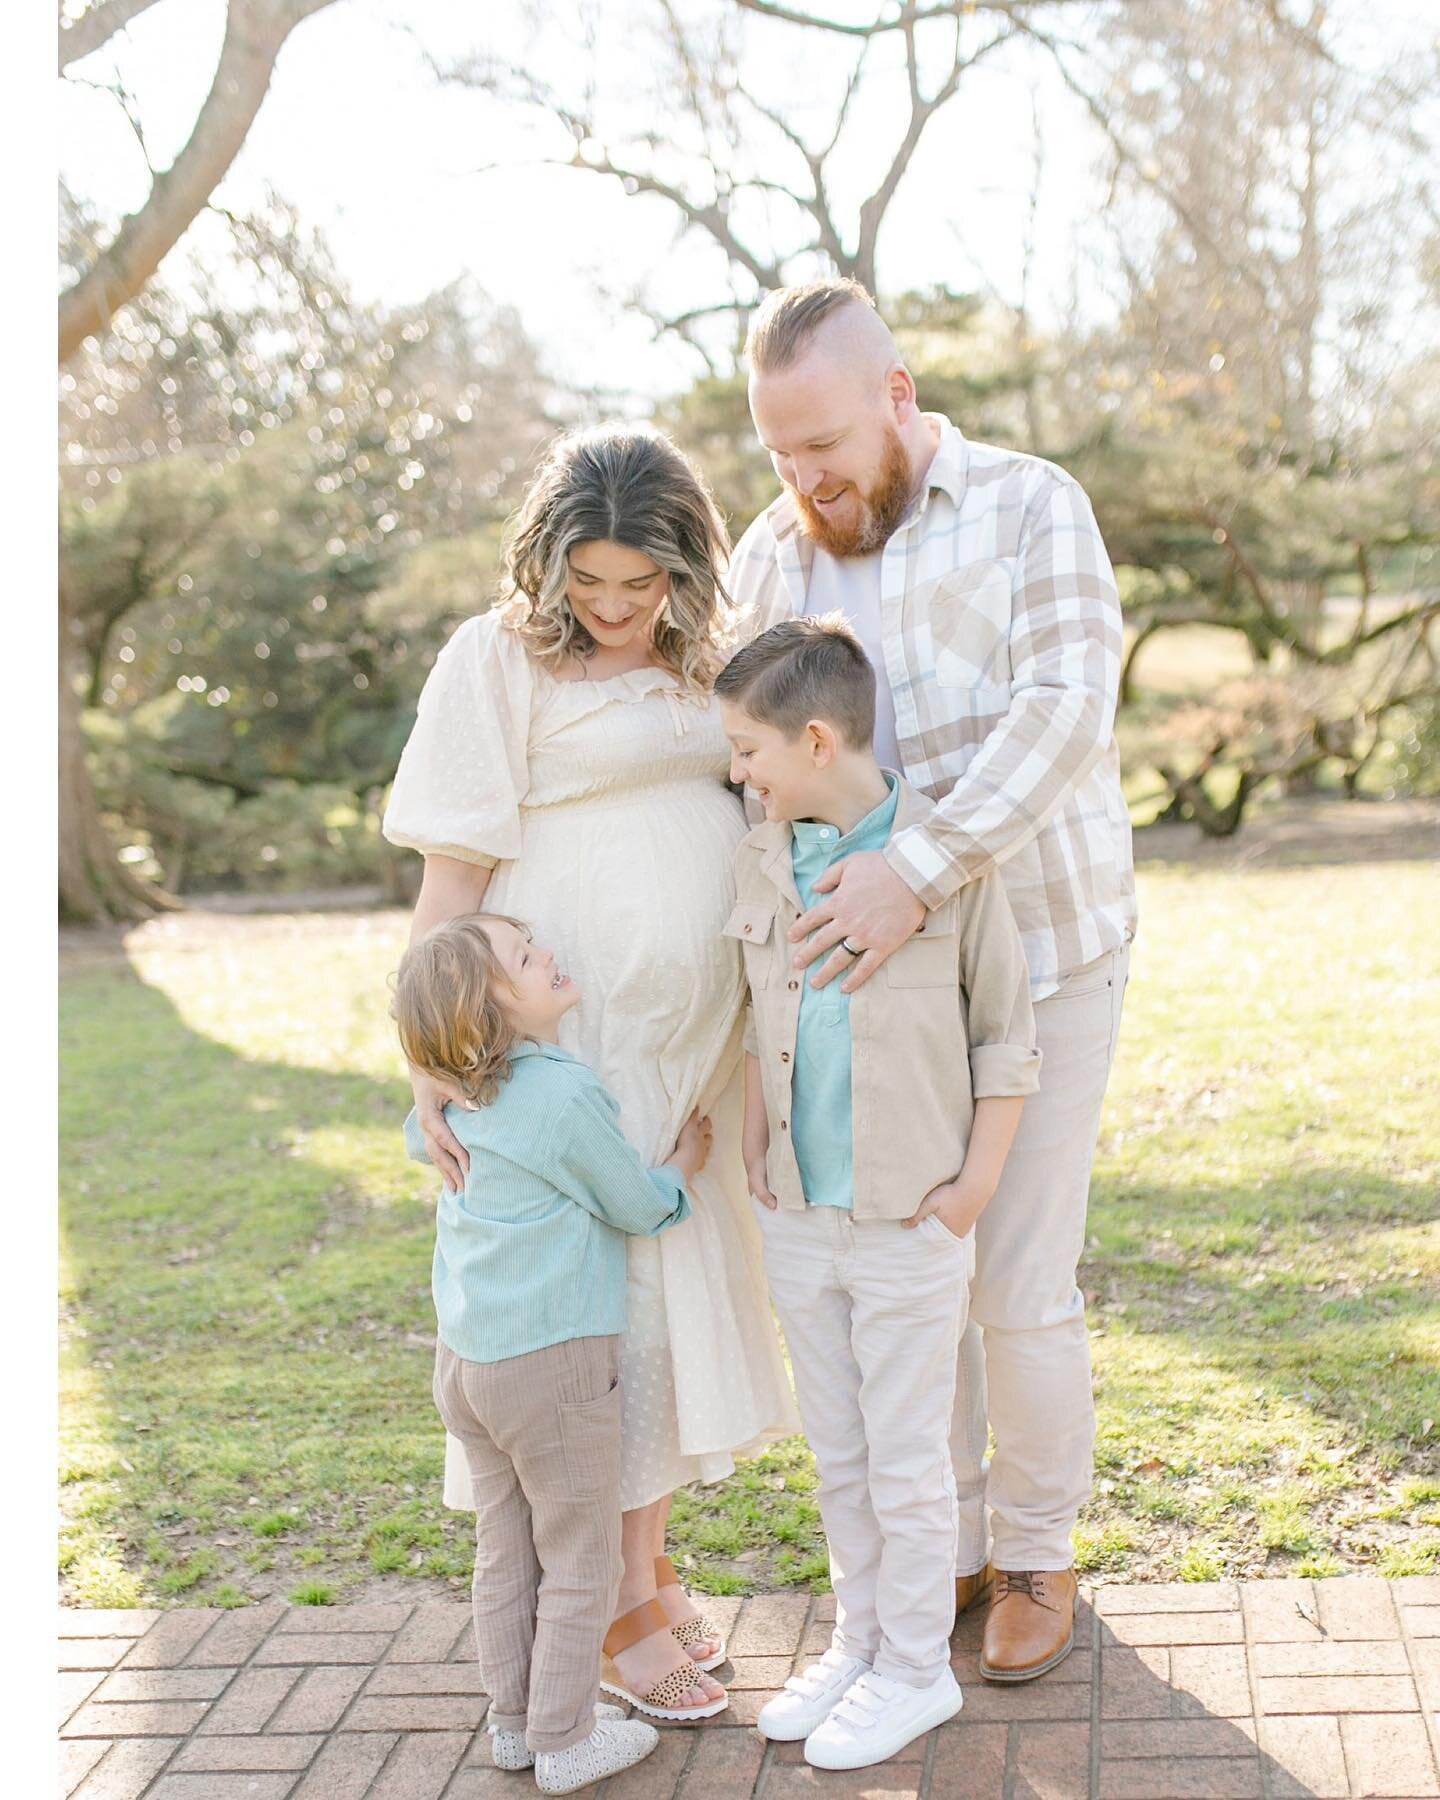 I mean how cute are they? I can&rsquo;t wait to meet baby sister 💗

#familysession #lifestylephotography #familyphotography  #studiophotographer #oxfordmsphotographer #travelphotography #savannahtnphotography #pickwickphotograhy #capturingmoments #c